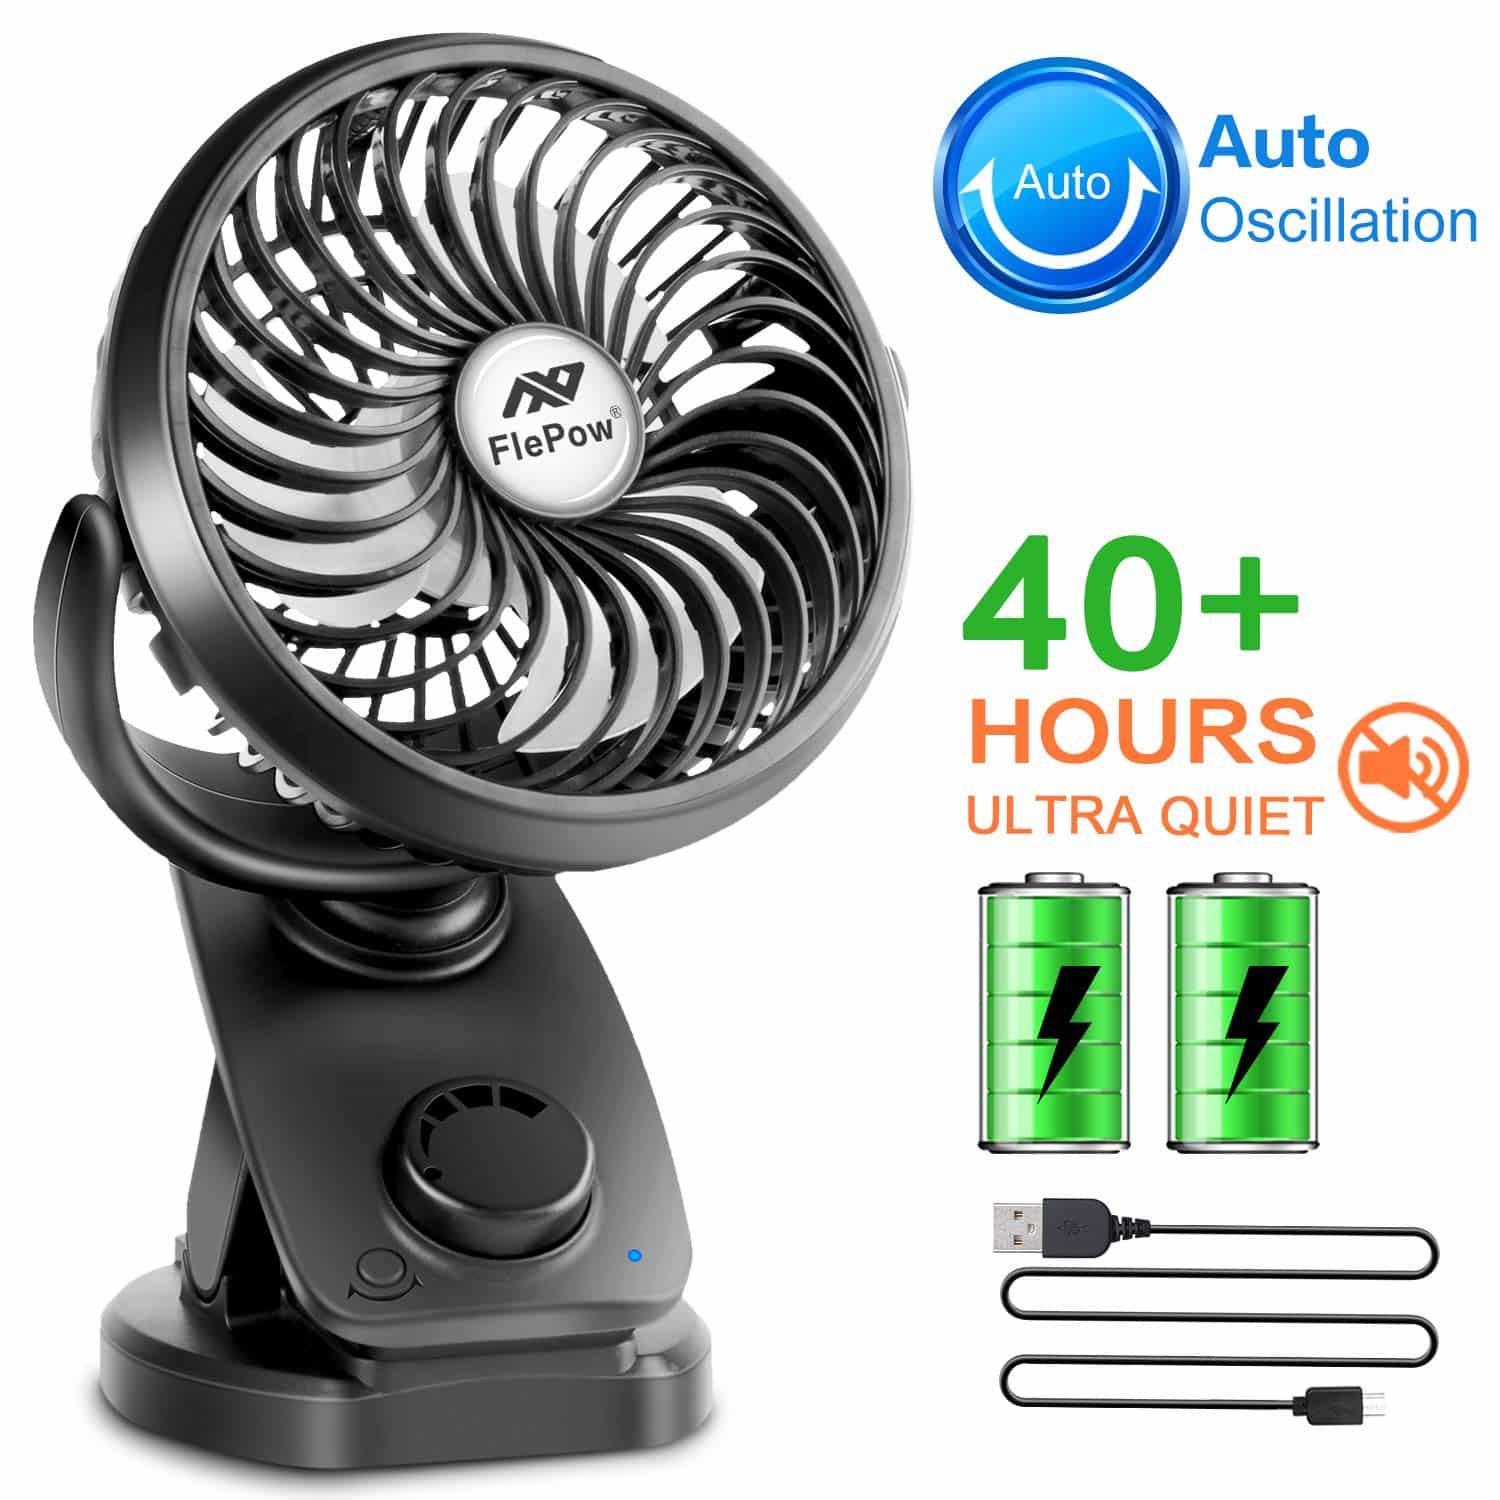 Top 10 Best Battery Operated Fans In (2020) - Guide What Is The Best Battery Operated Fan